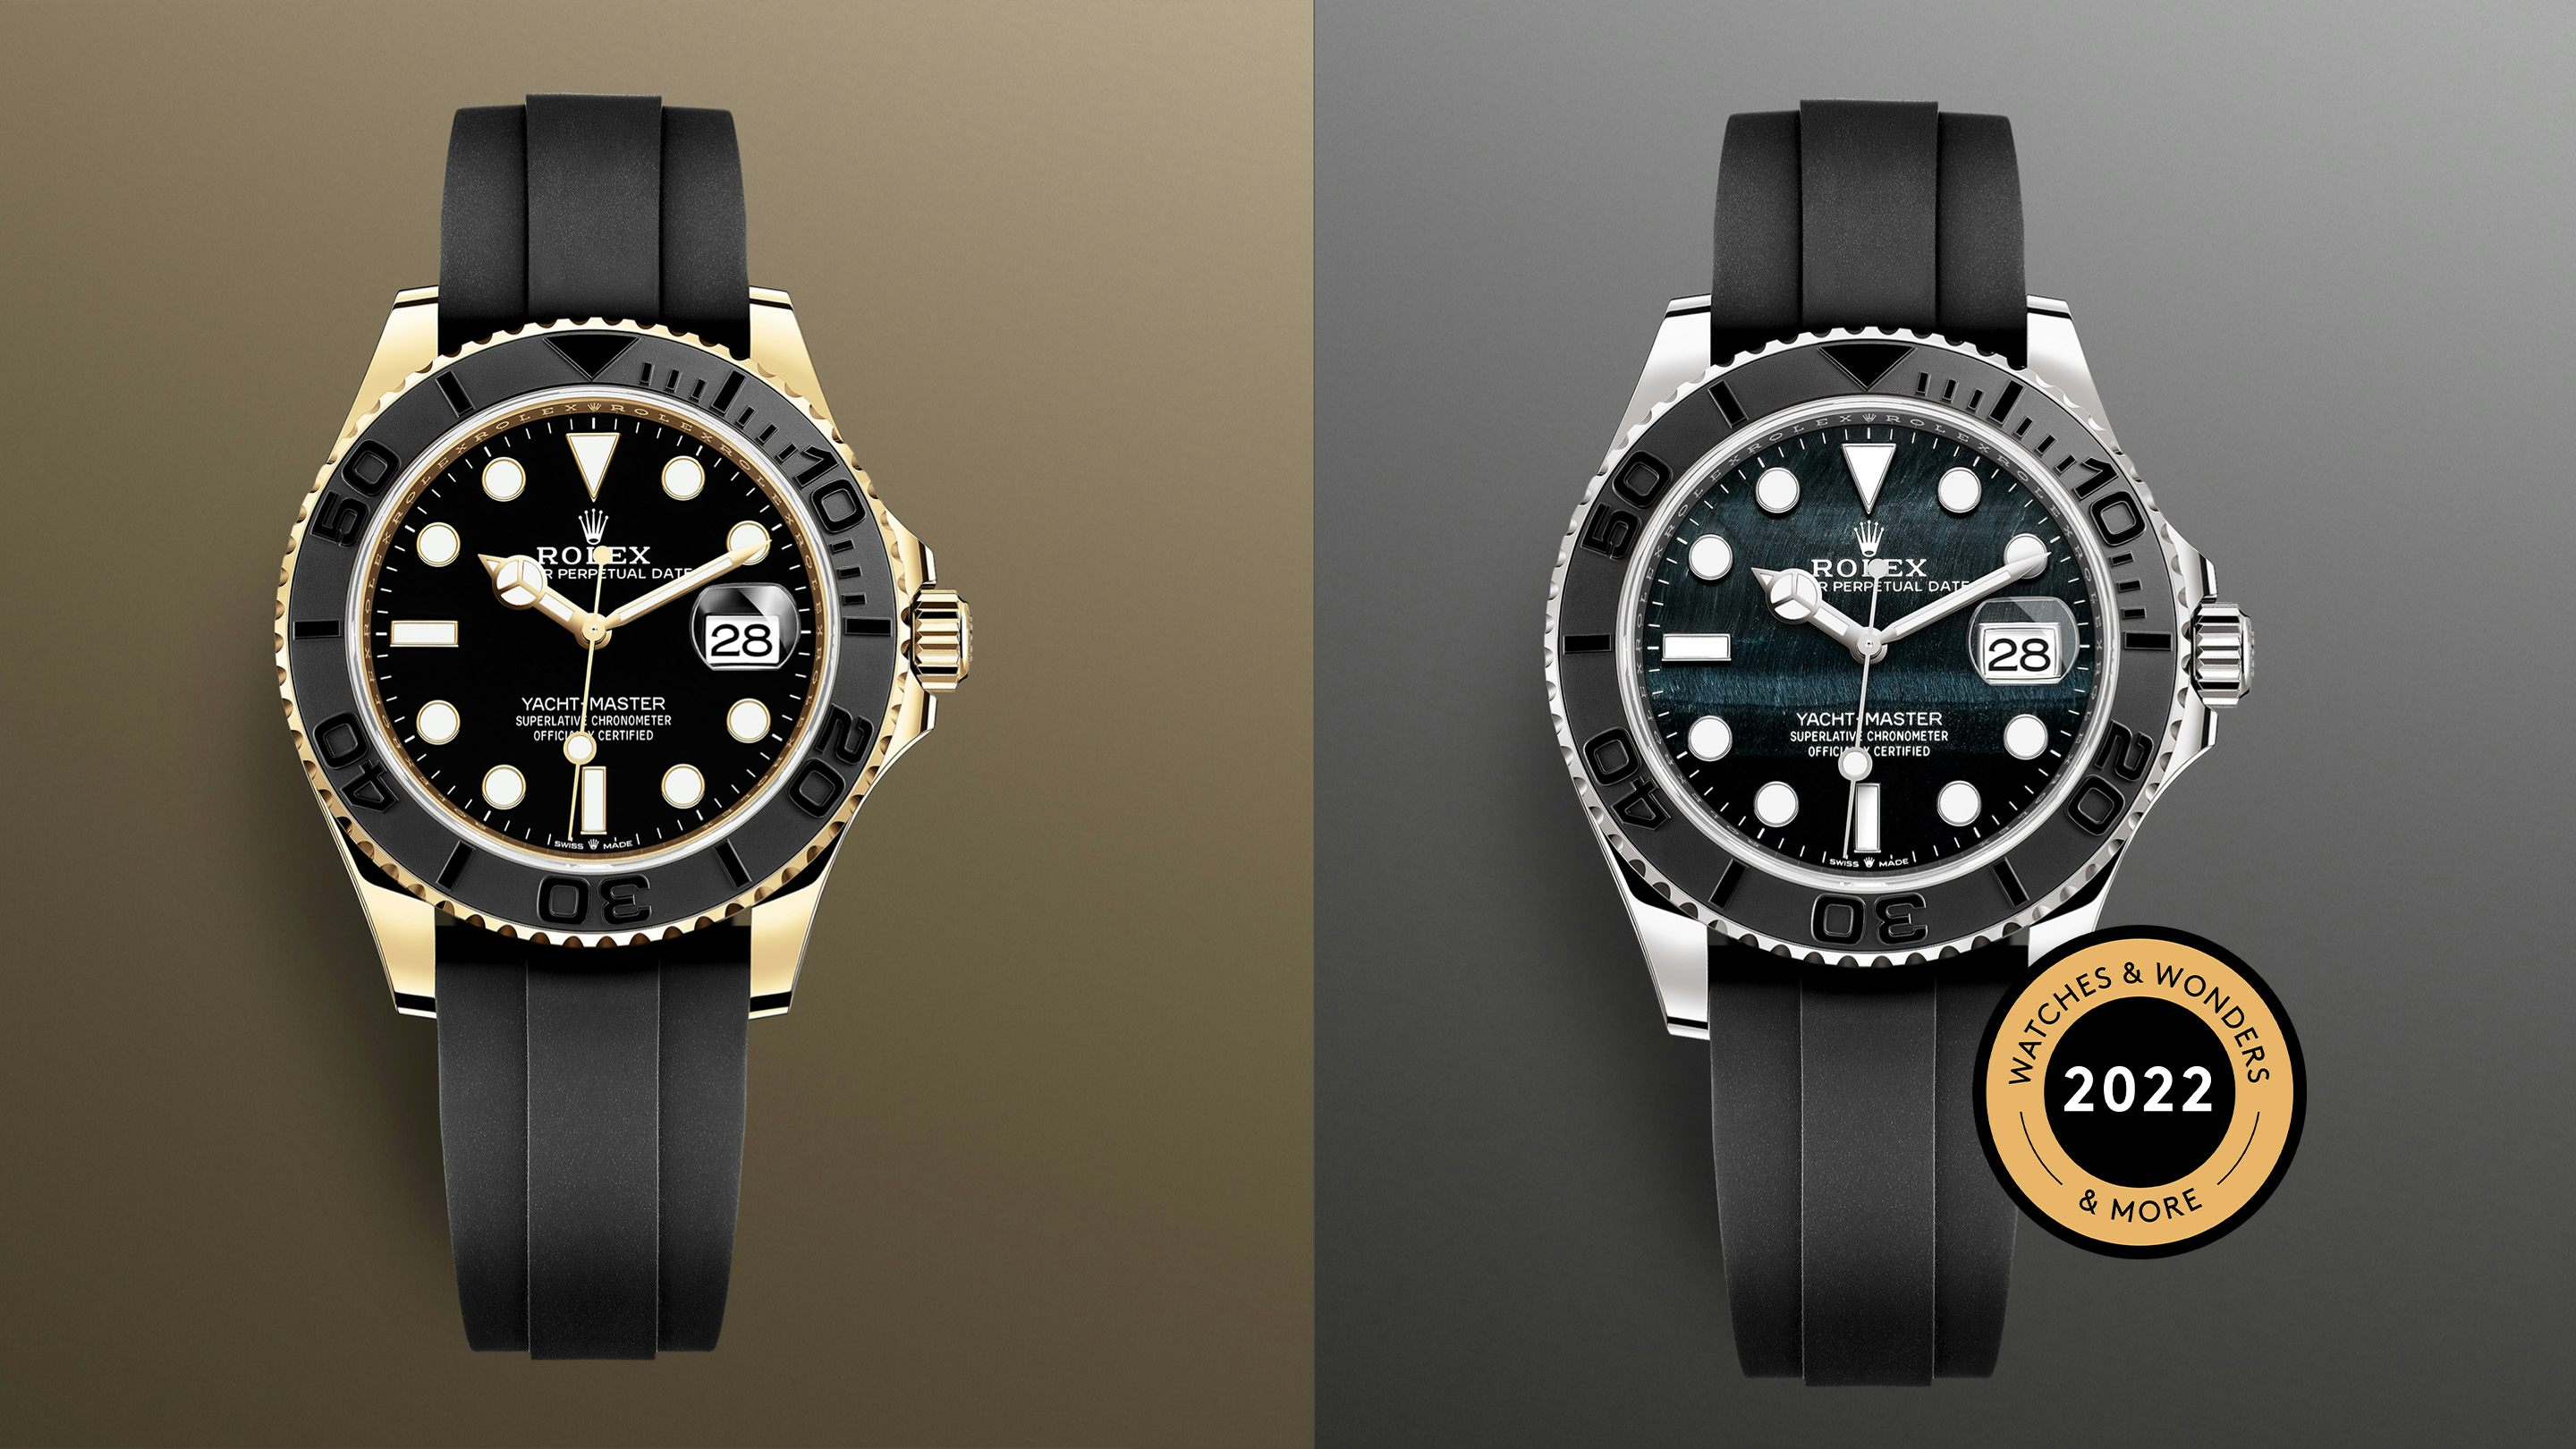 Why There Might Be a New Rolex Yacht-Master II This Year